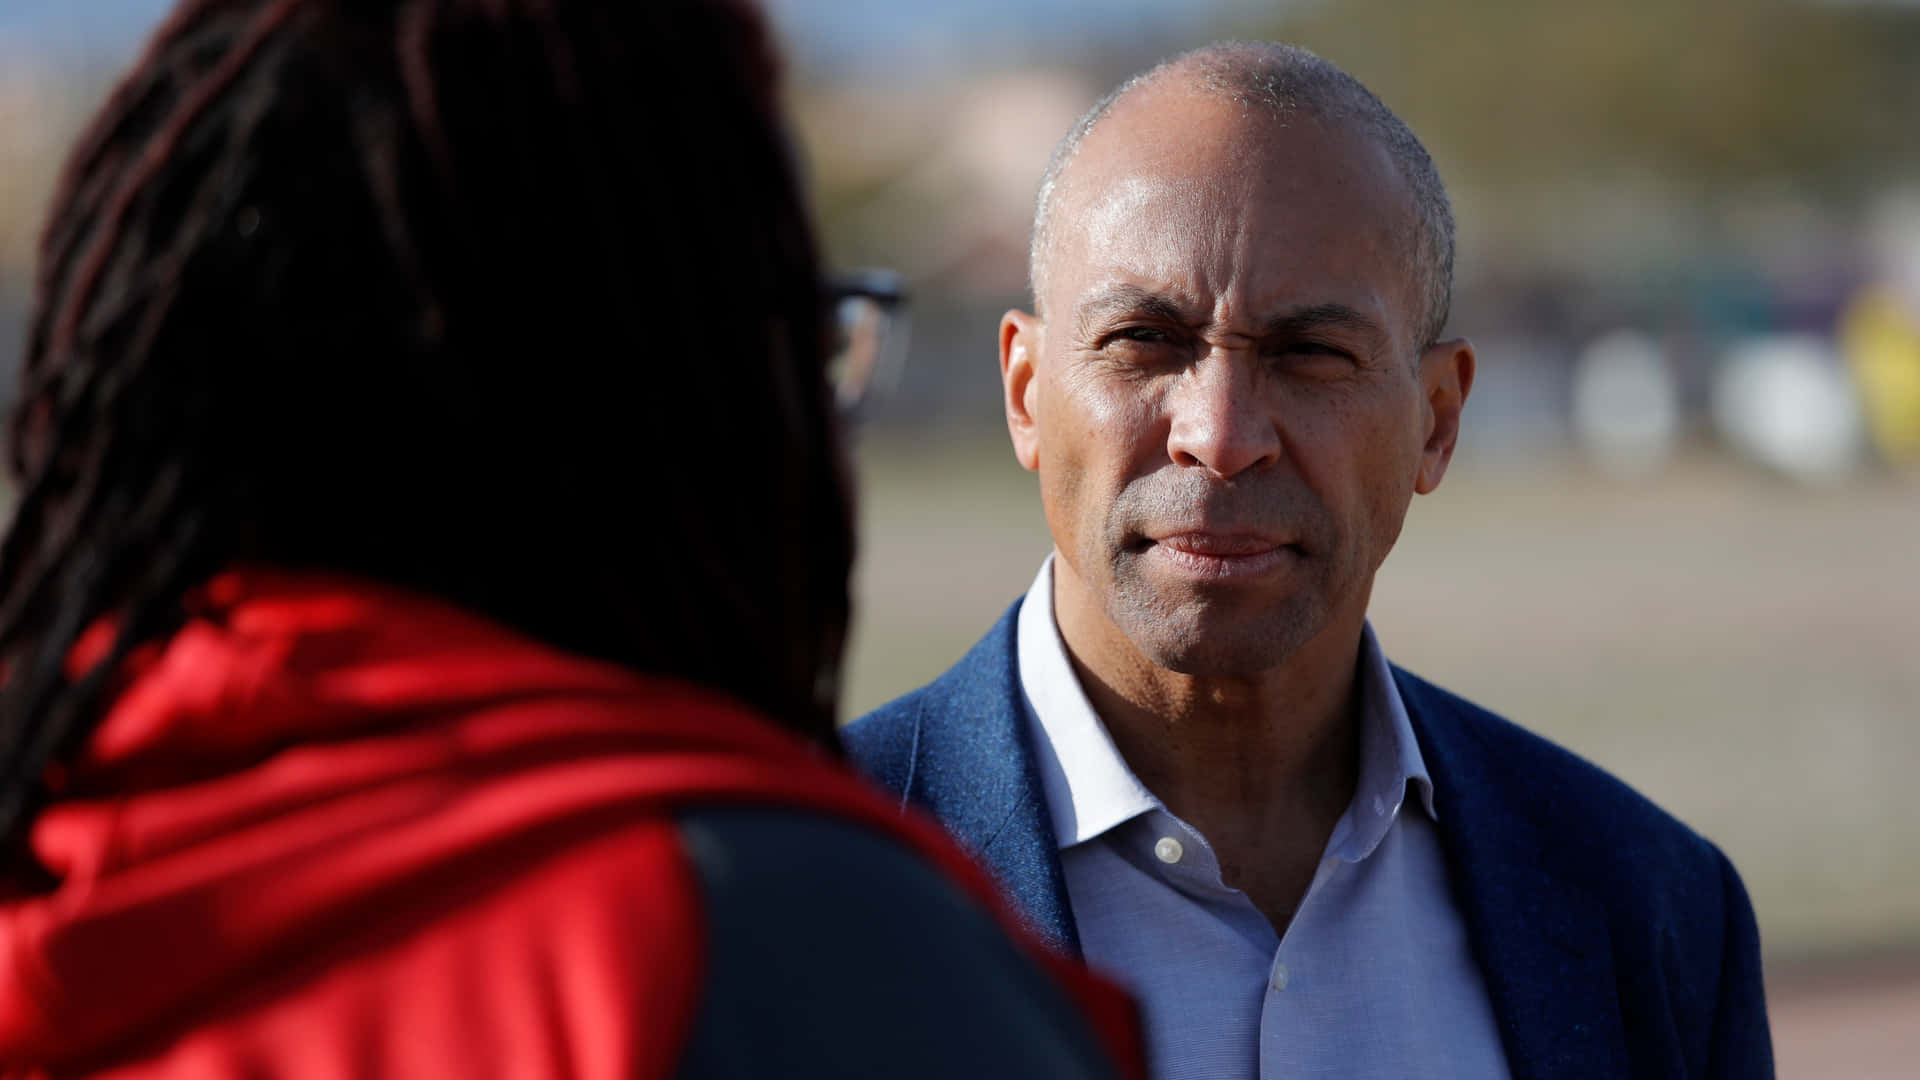 Deval Patrick Engaged in a Deep Conversation Wallpaper